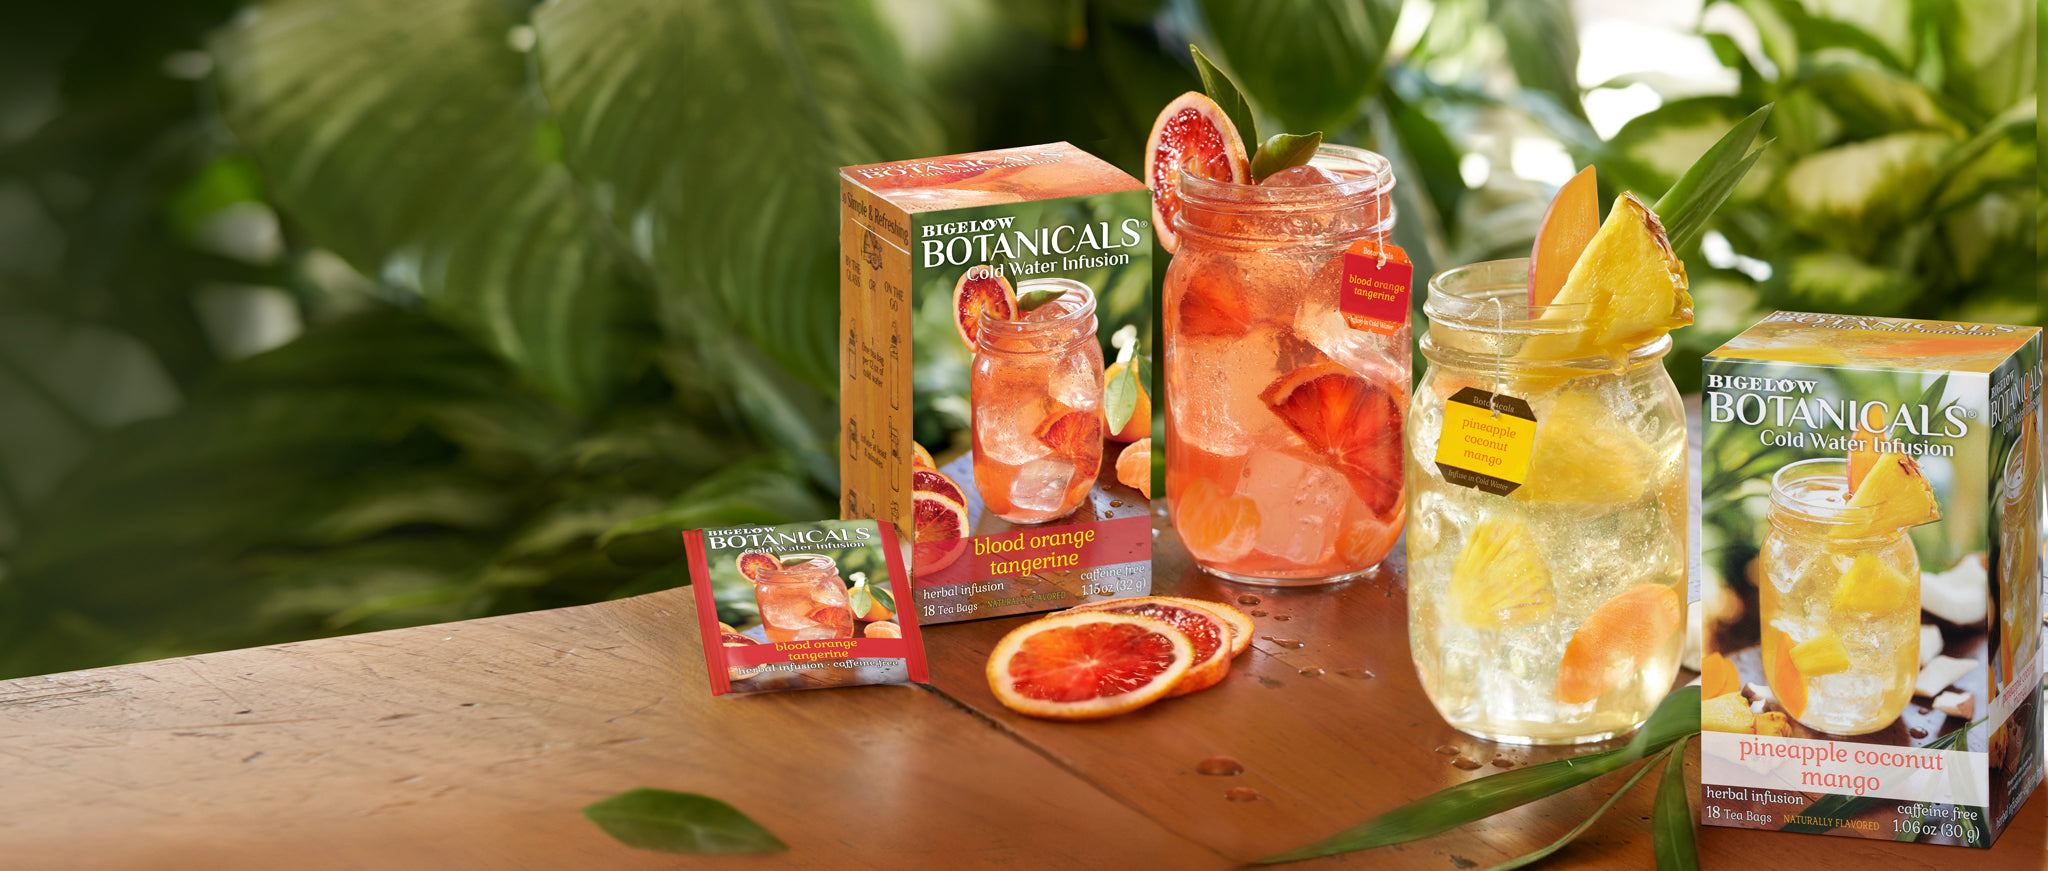 PRESS RELEASE: Bigelow Tea Introduces NEW Botanical Cold Water Infusio